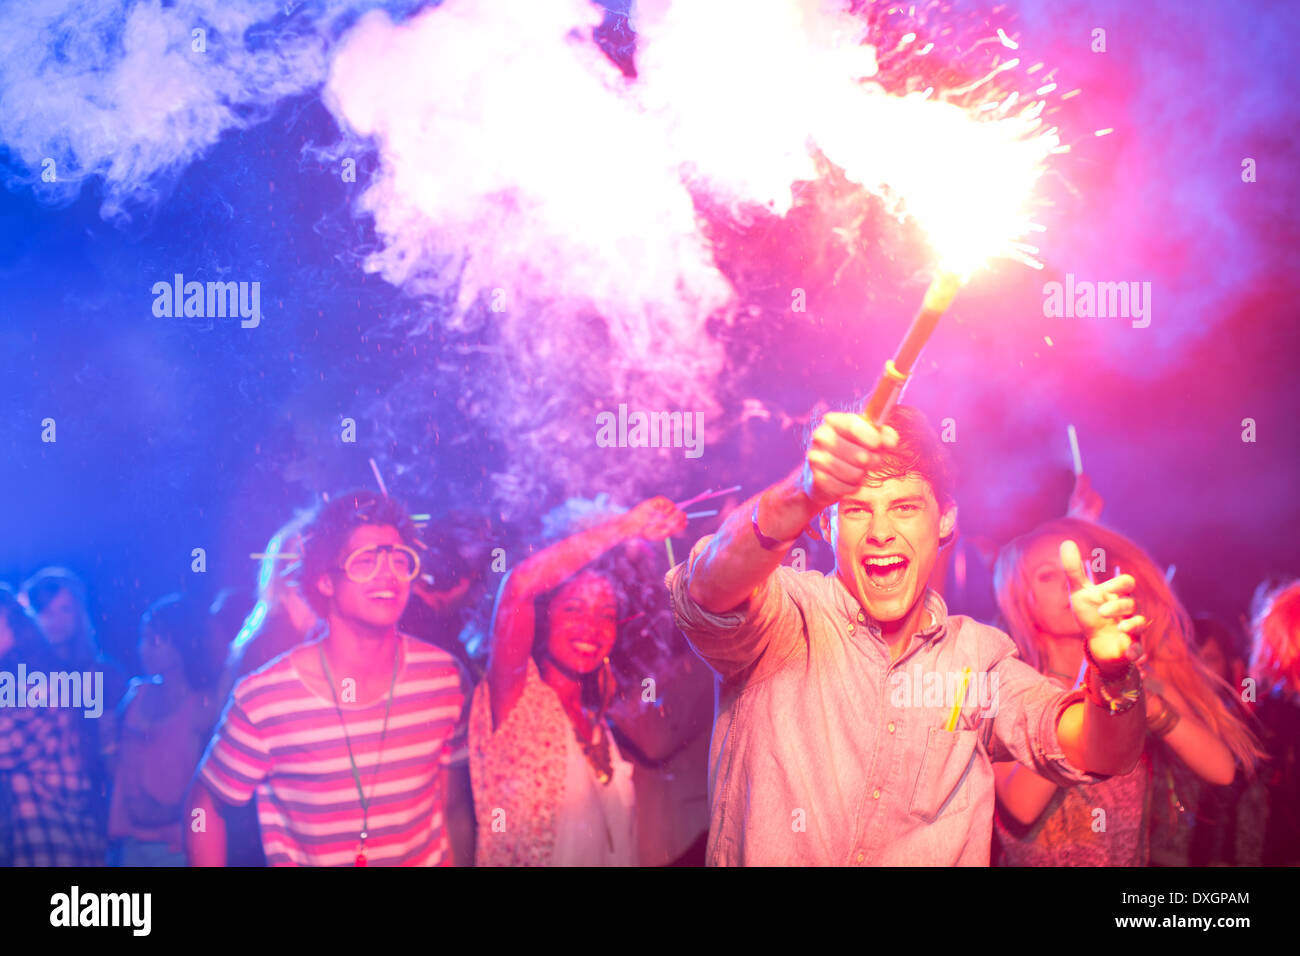 Fans with fireworks at music festival Stock Photo